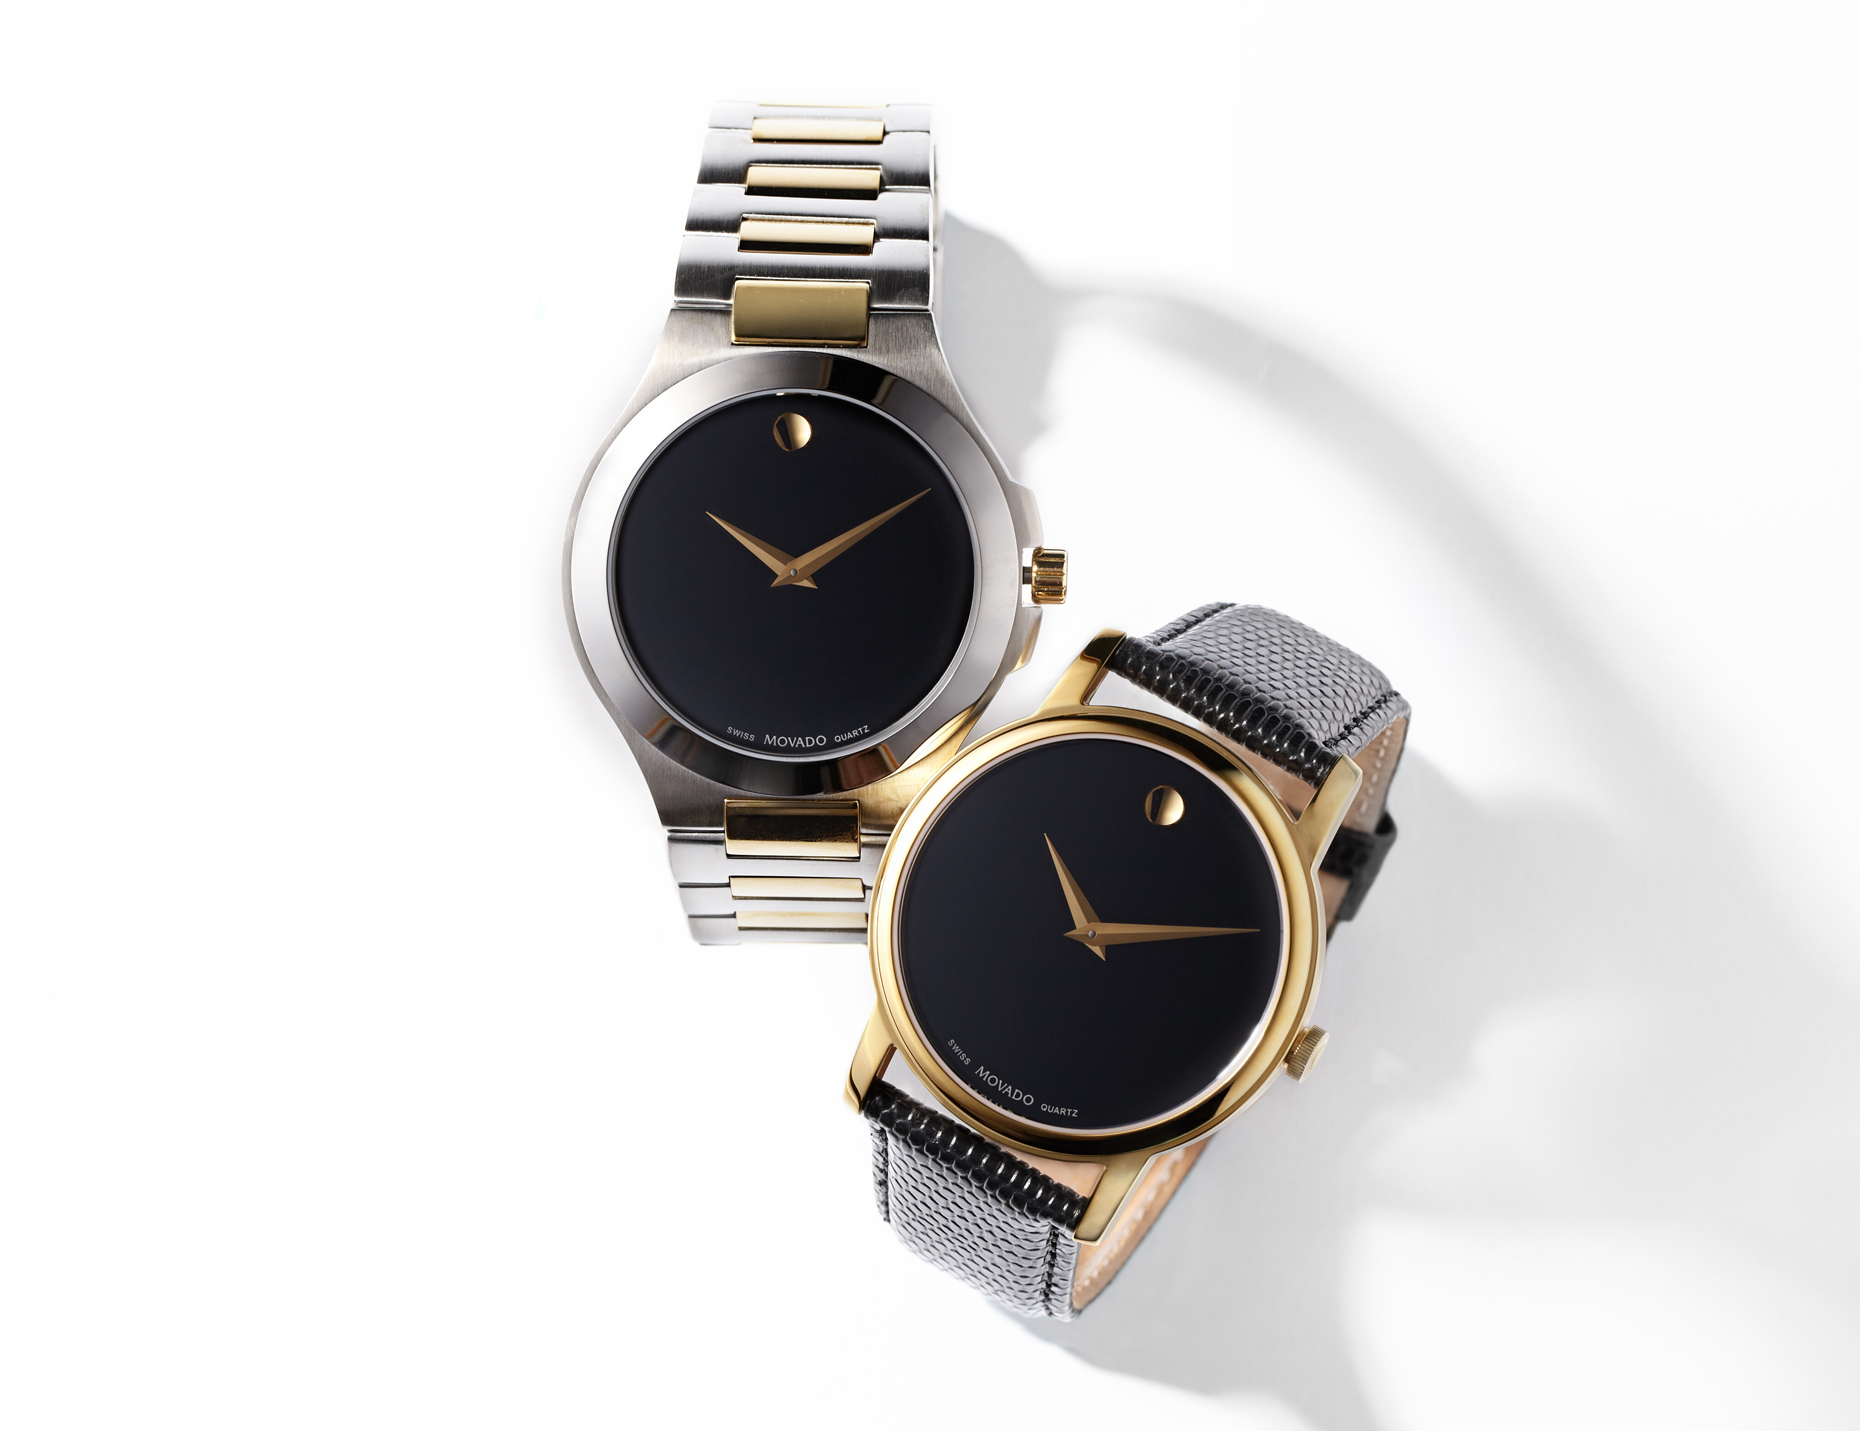 131111_Classic-Timepieces-Movado-Tissot-and-More--10135395_1020_A1